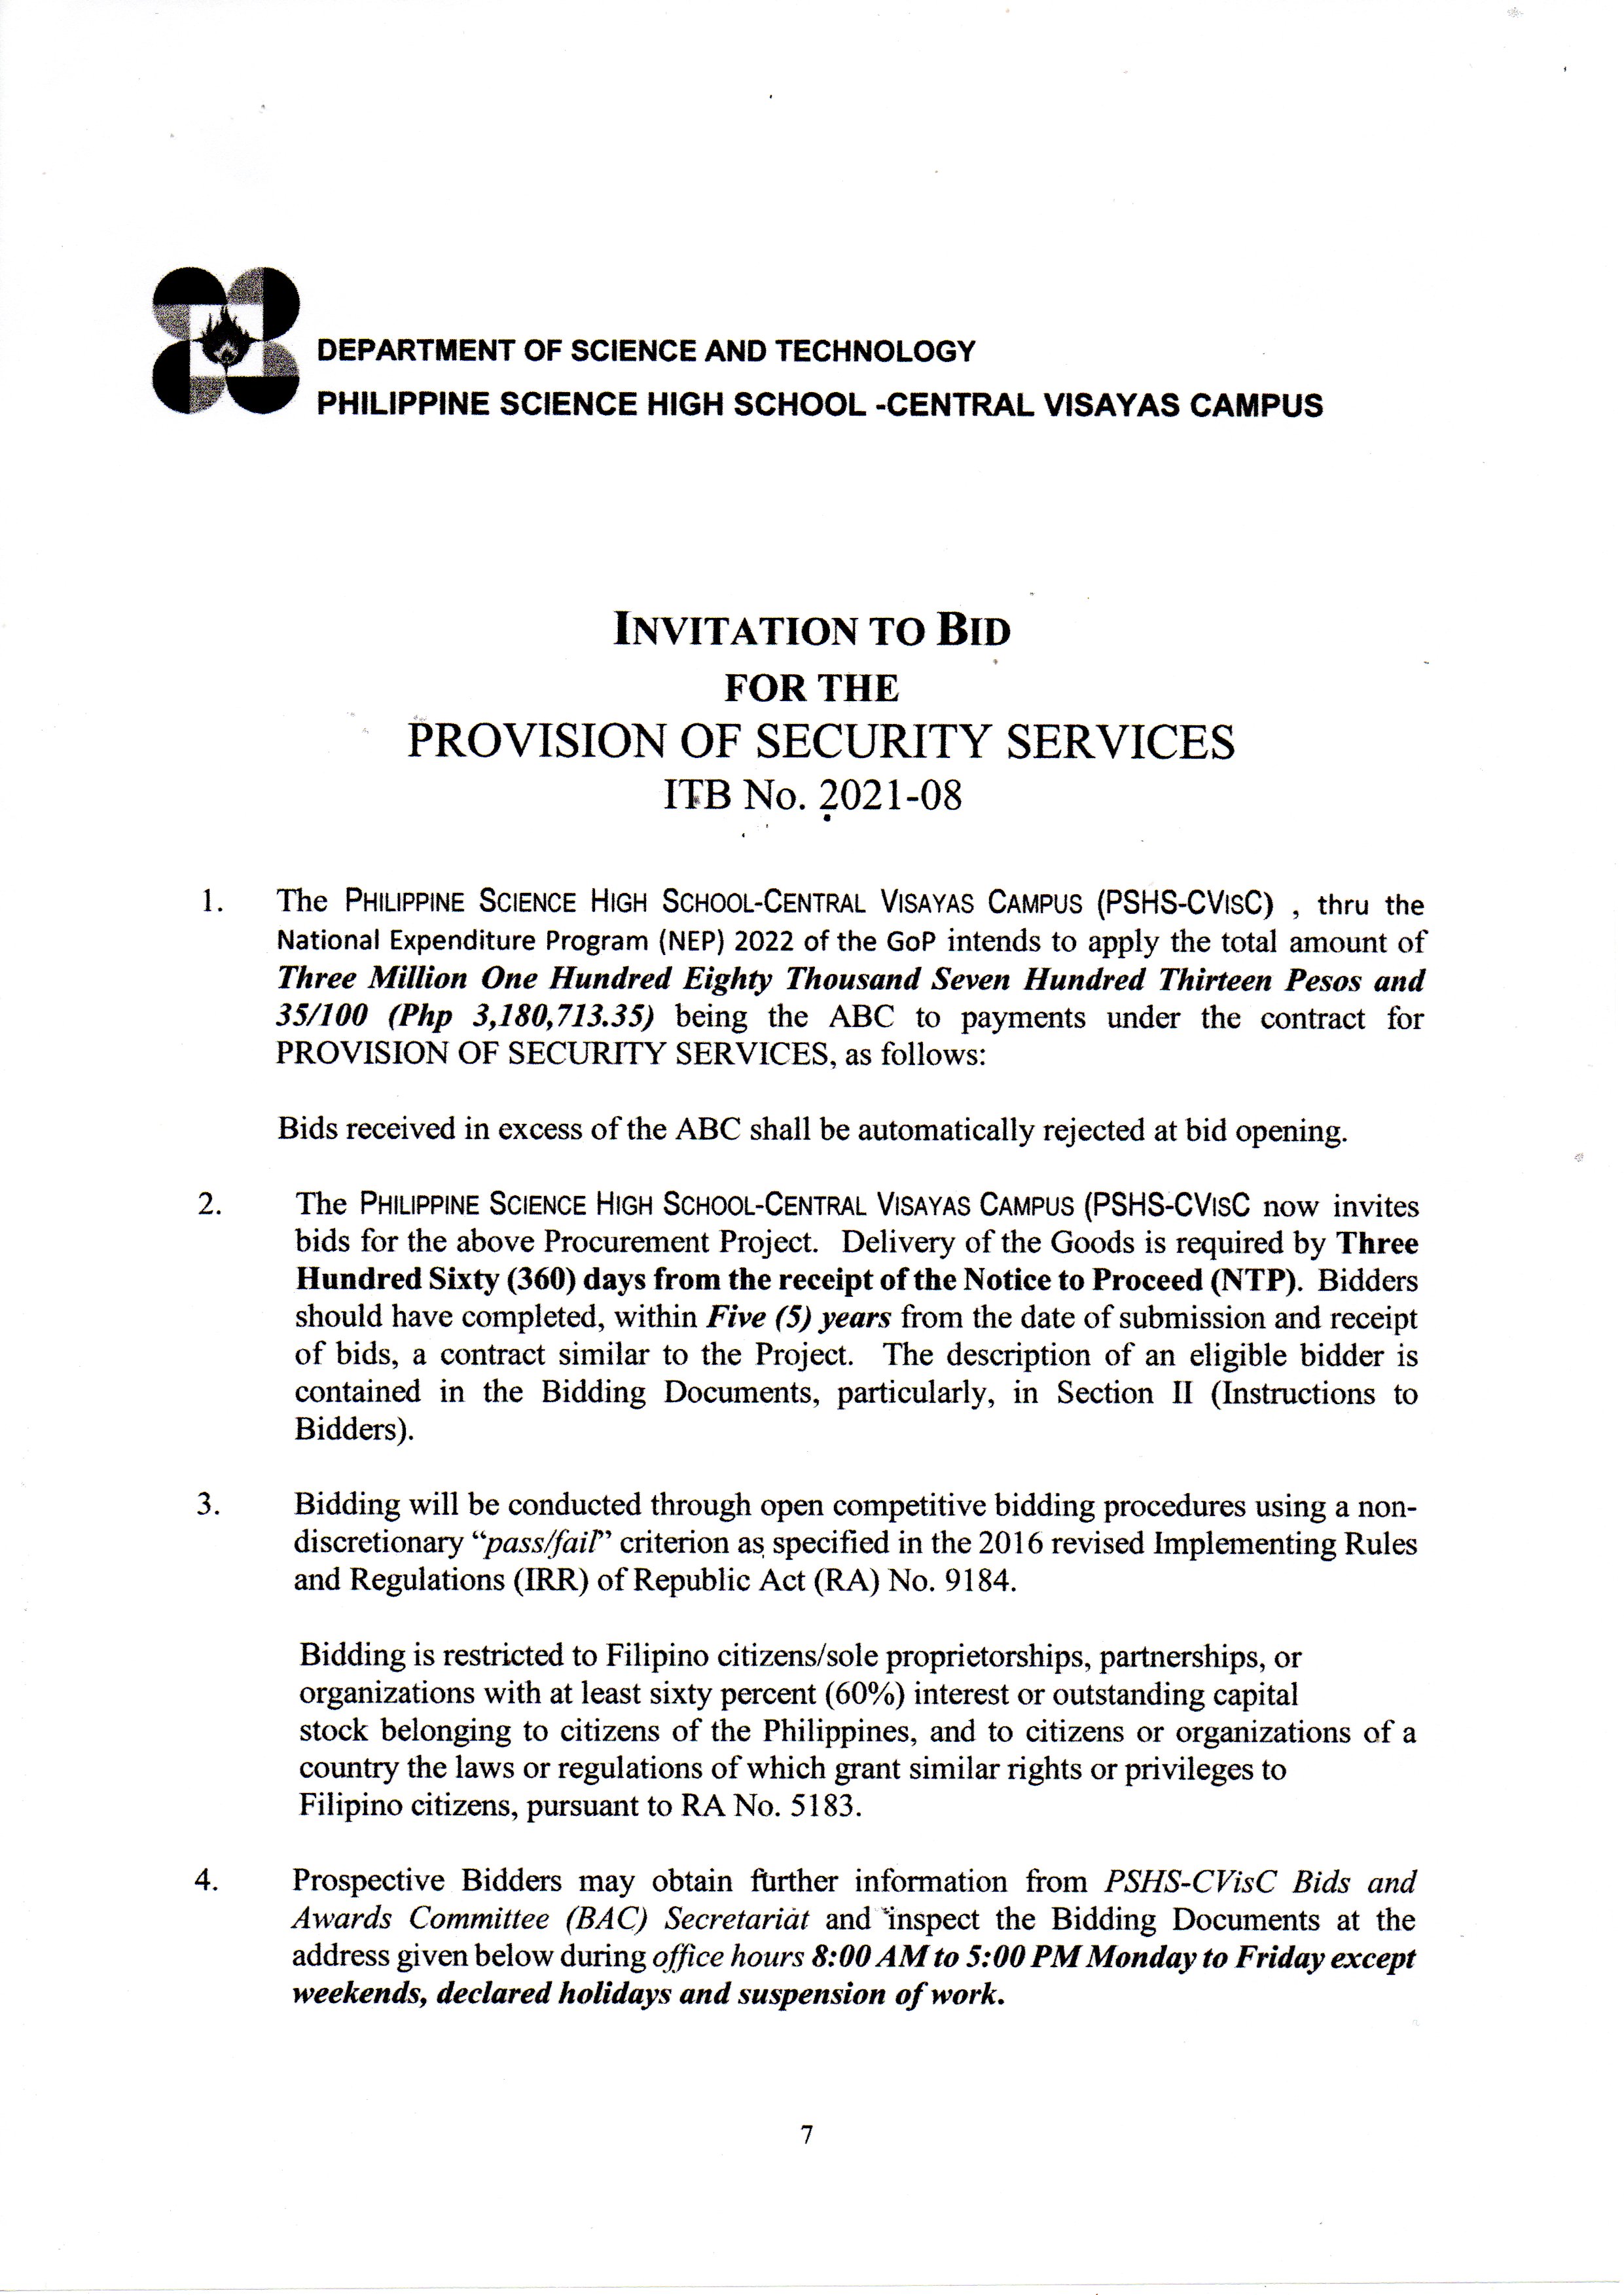 itb provision security services p3